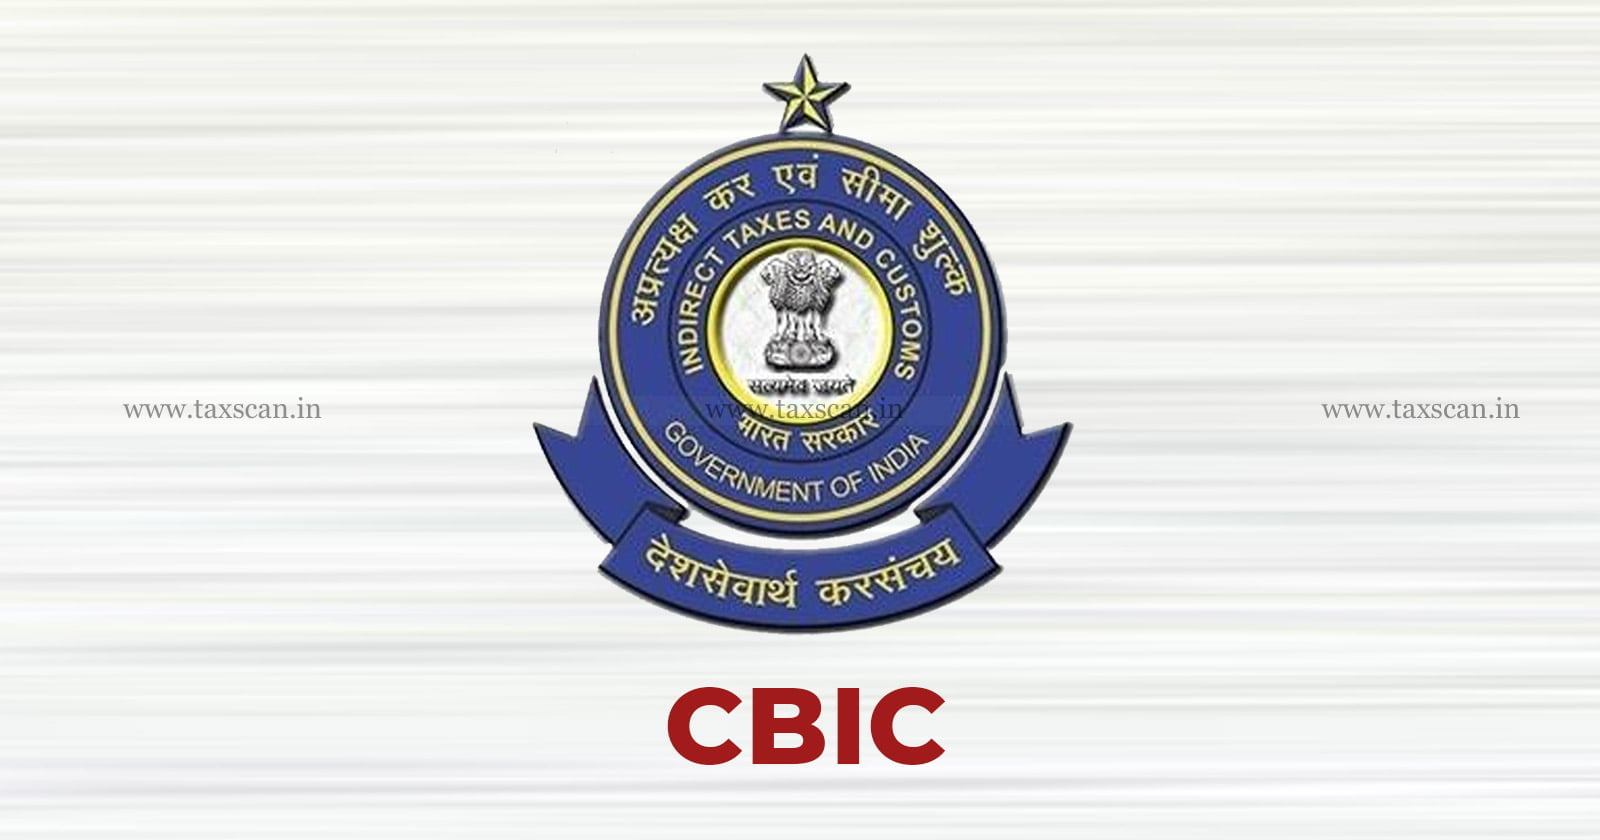 CBIC - GSTR-9 - Annual Returns - Central Board Of Indirect Taxes & Customs - Taxpayers - TAXSCAN